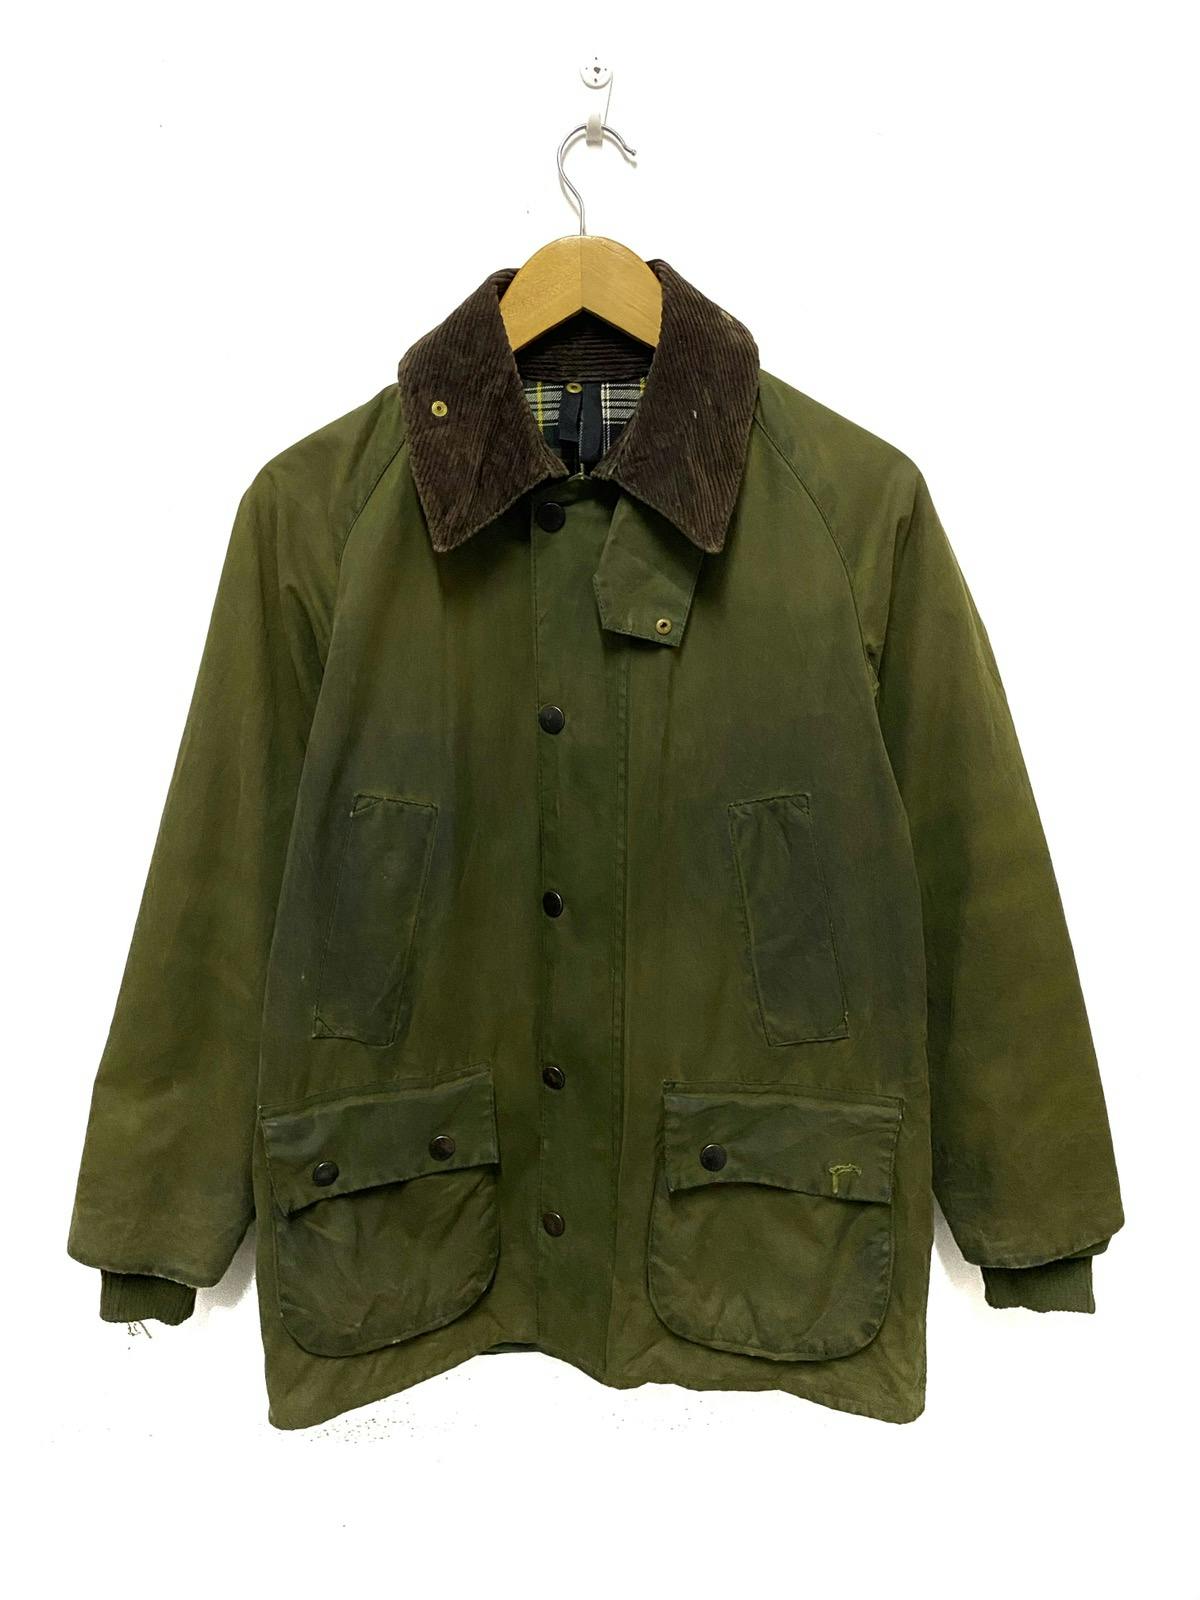 Barbour Bedale A100 Wax Jacket Made in England - 1